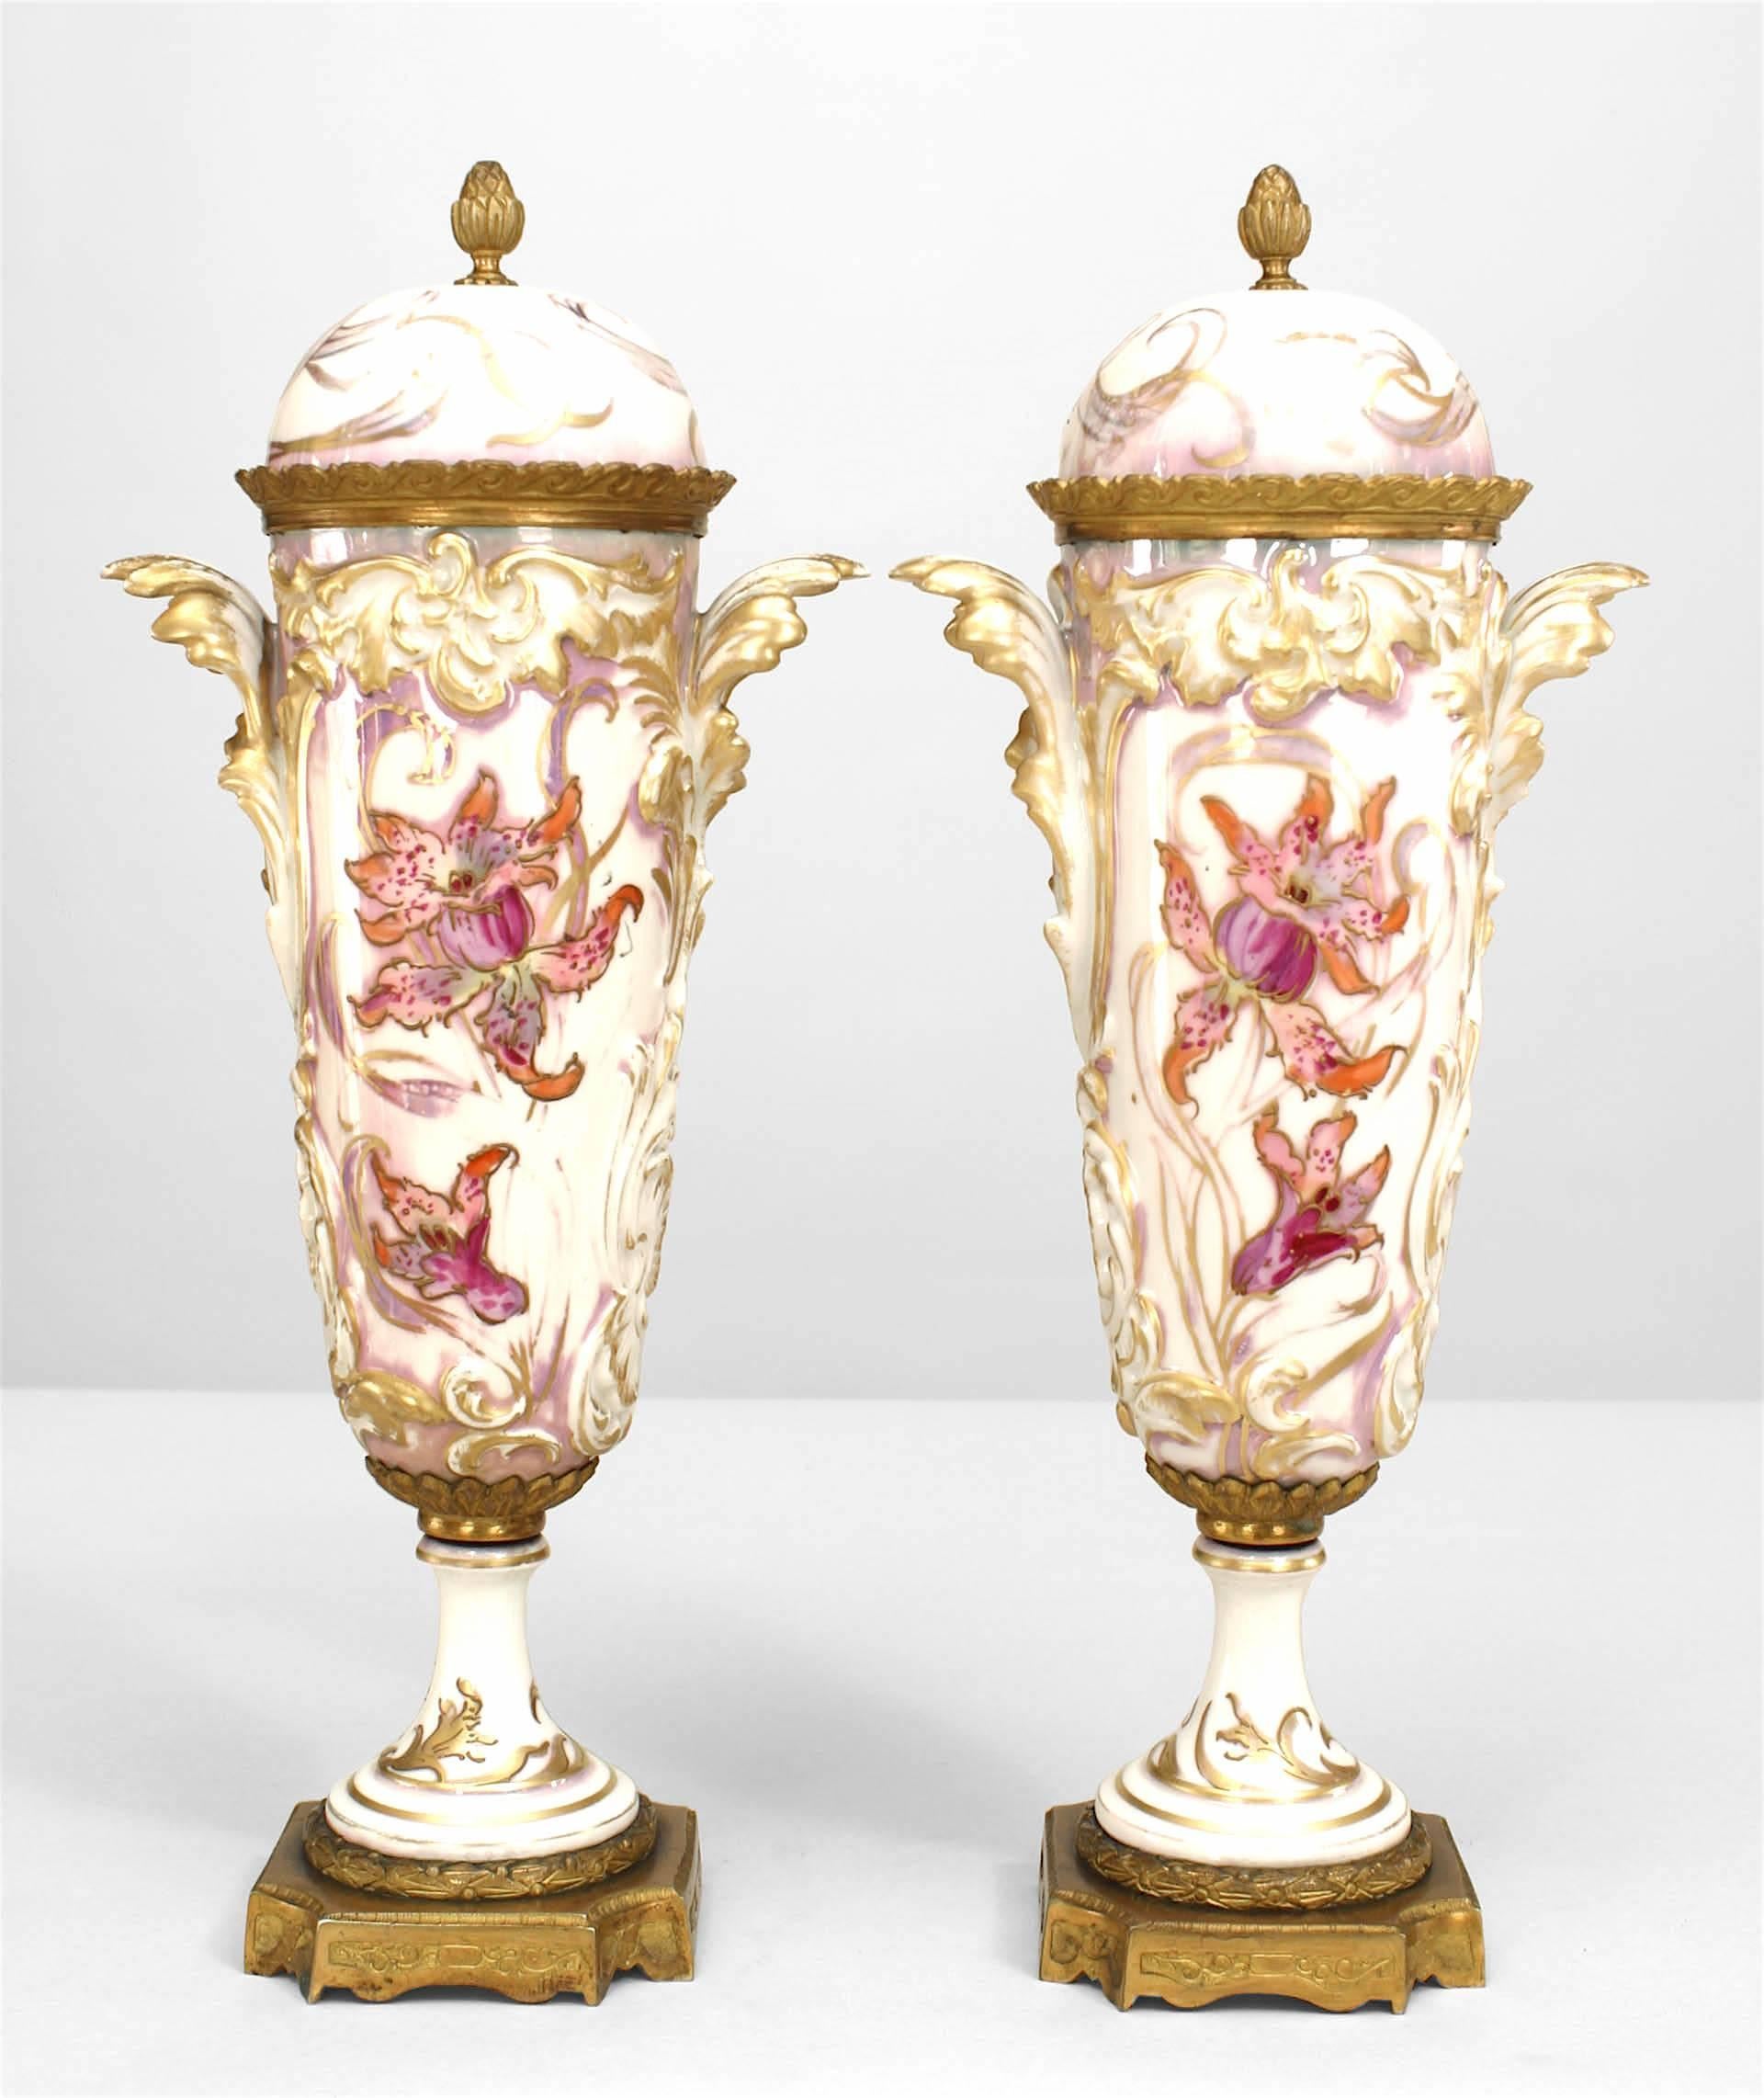 Pair of French Art Nouveau Sèvres porcelain vases with pink and gilt trim and female figure with cover and leaf handles.
     